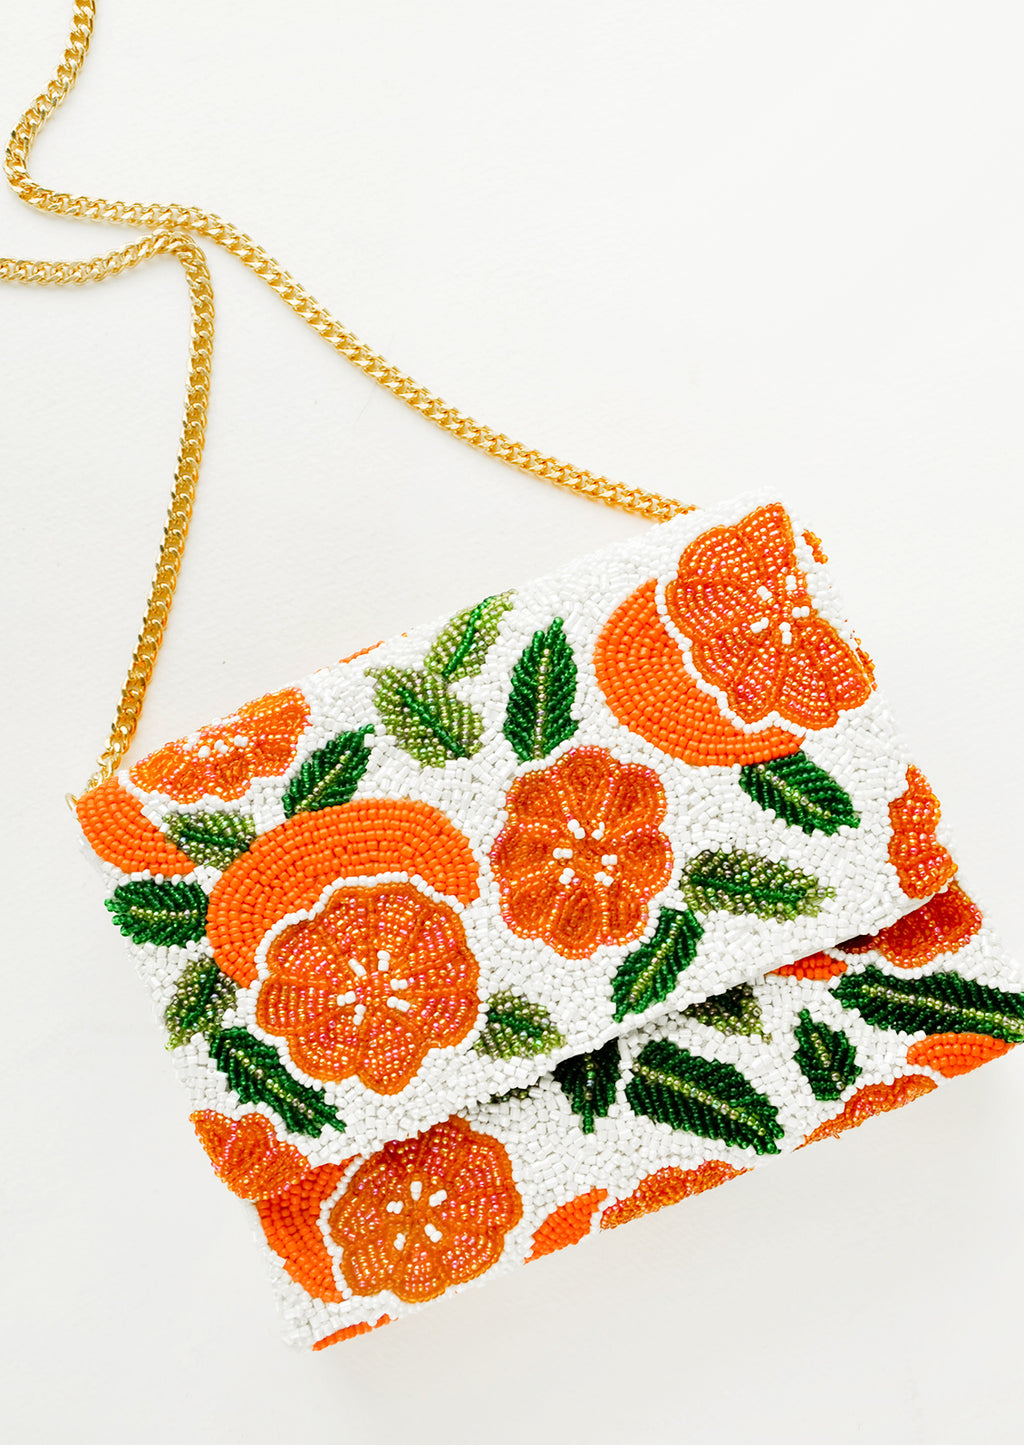 3: Beaded box-shaped clutch with orange citrus print and gold chain shoulder strap